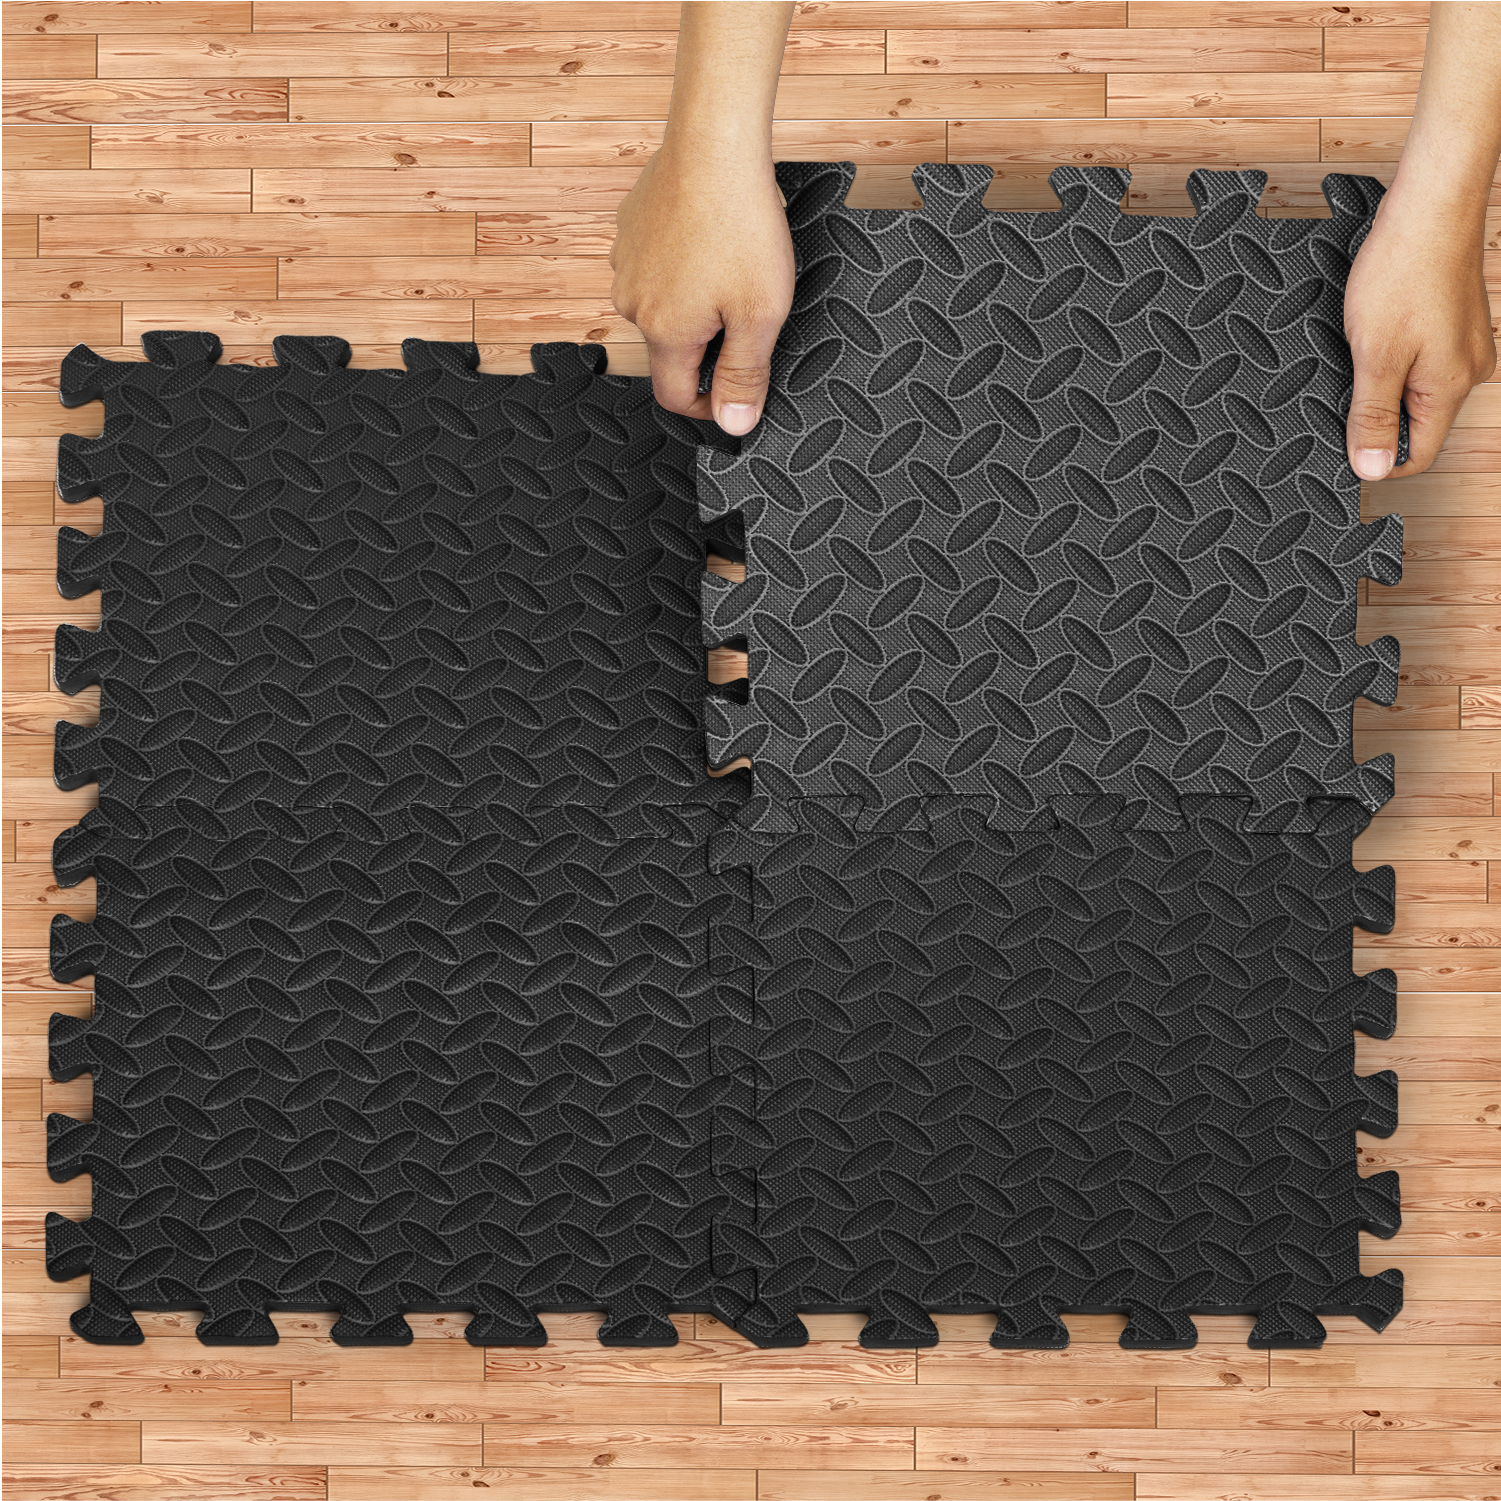 Yes4All 12 pcs Interlocking Exercise Foam Mats, Cover 12 sqft, 3/8 inch Thick, Black Color - image 3 of 7